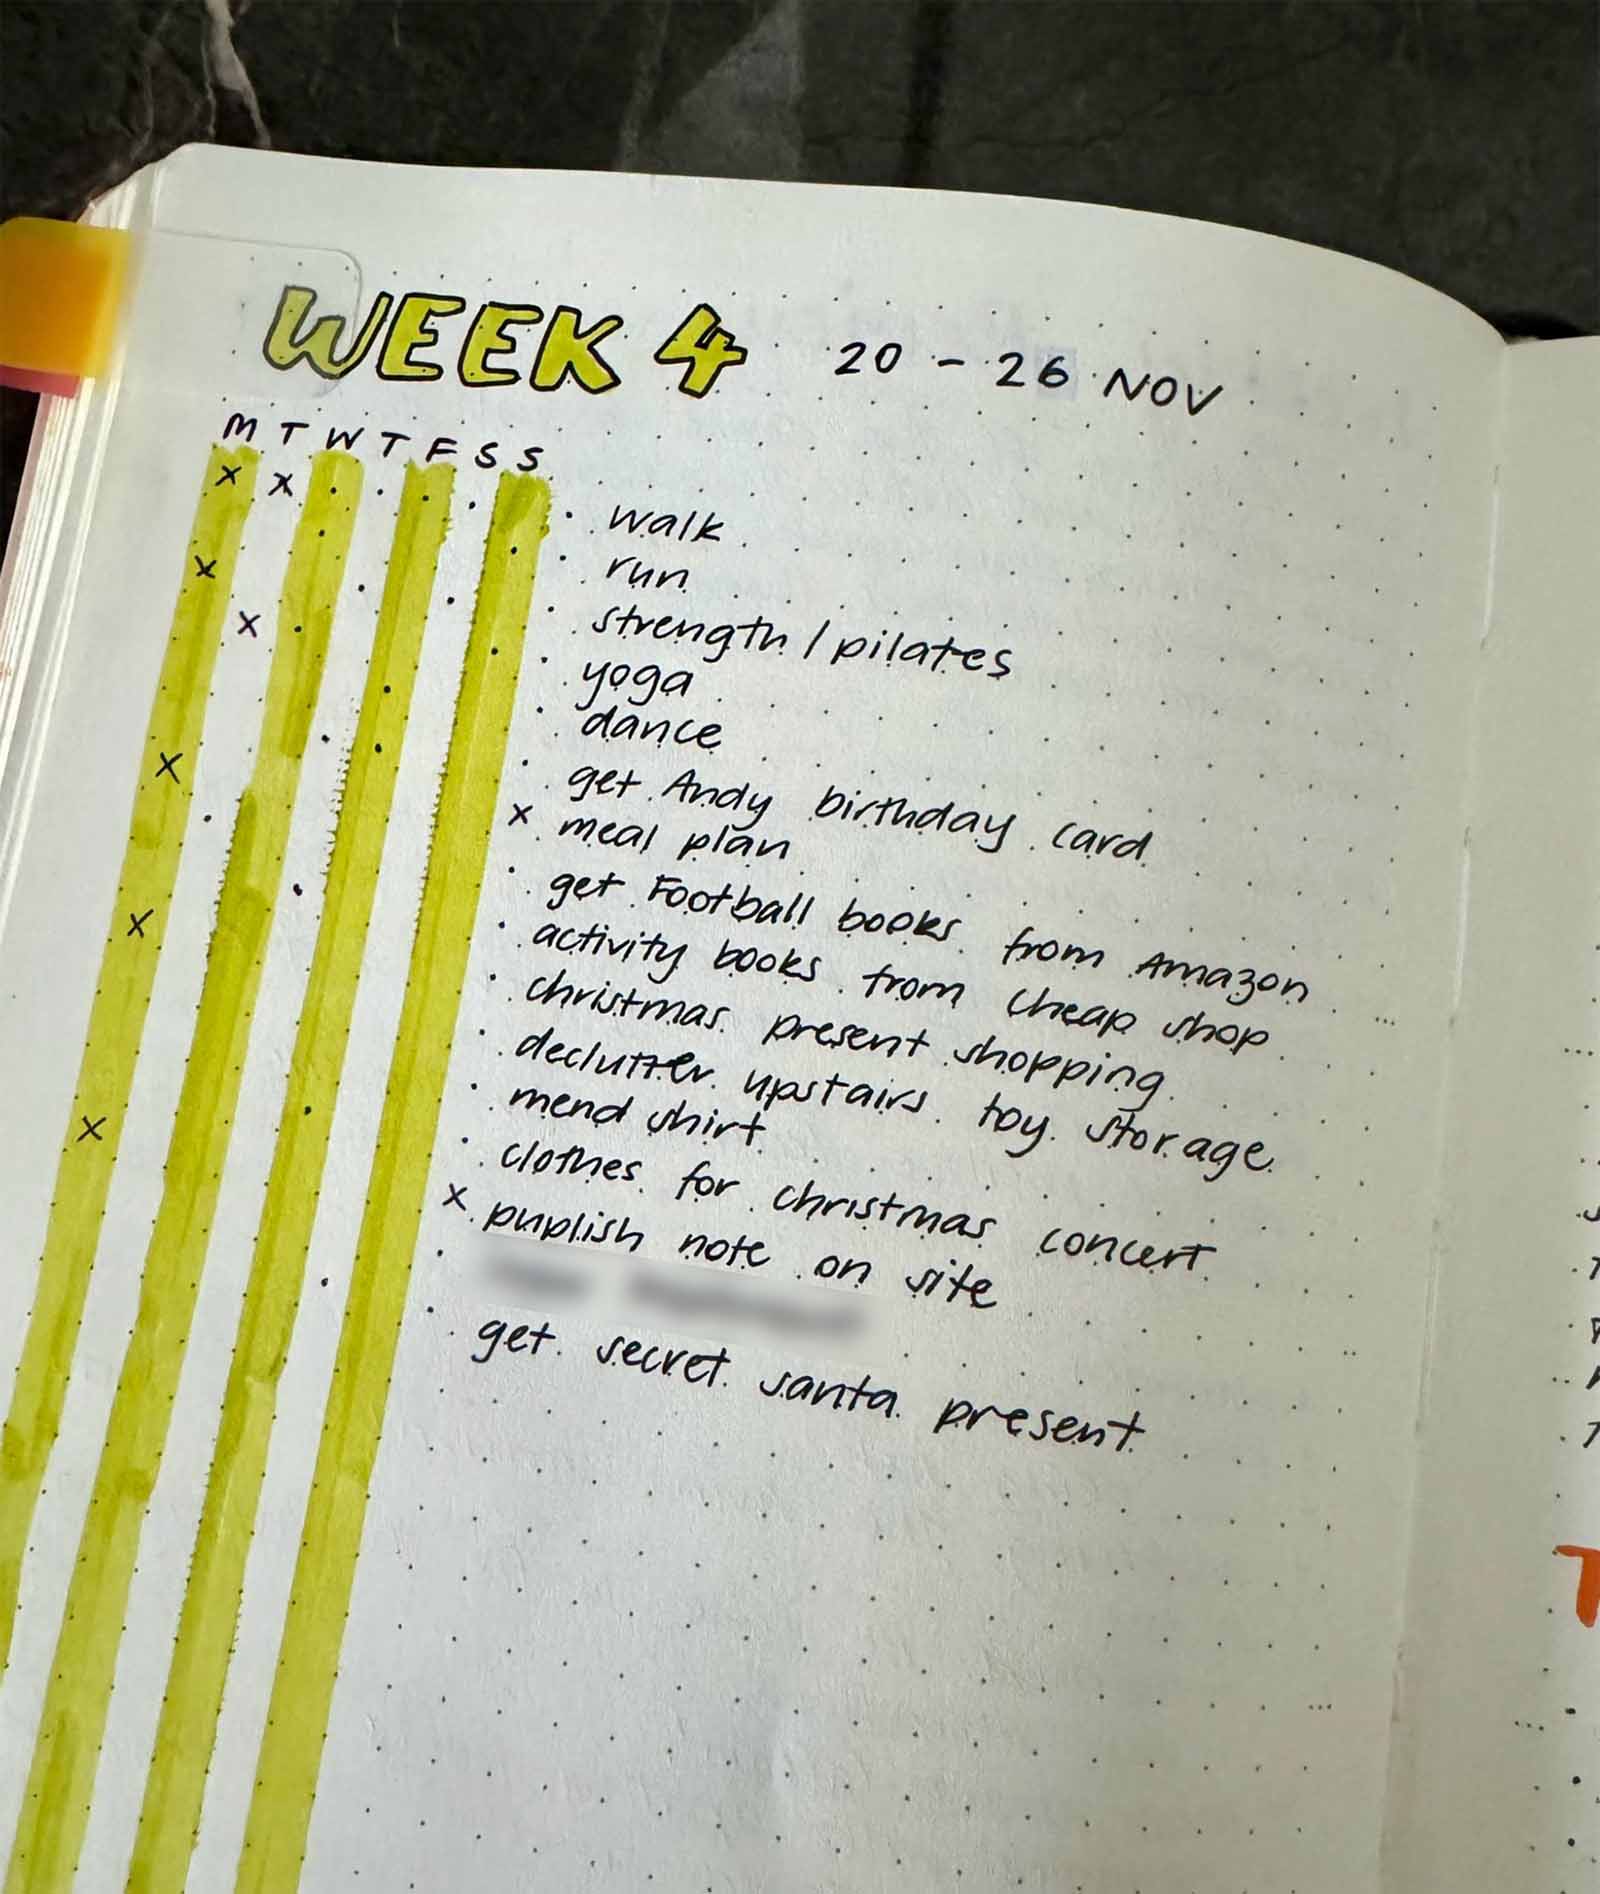 A photo of my bullet journal open on the weekly task list spread